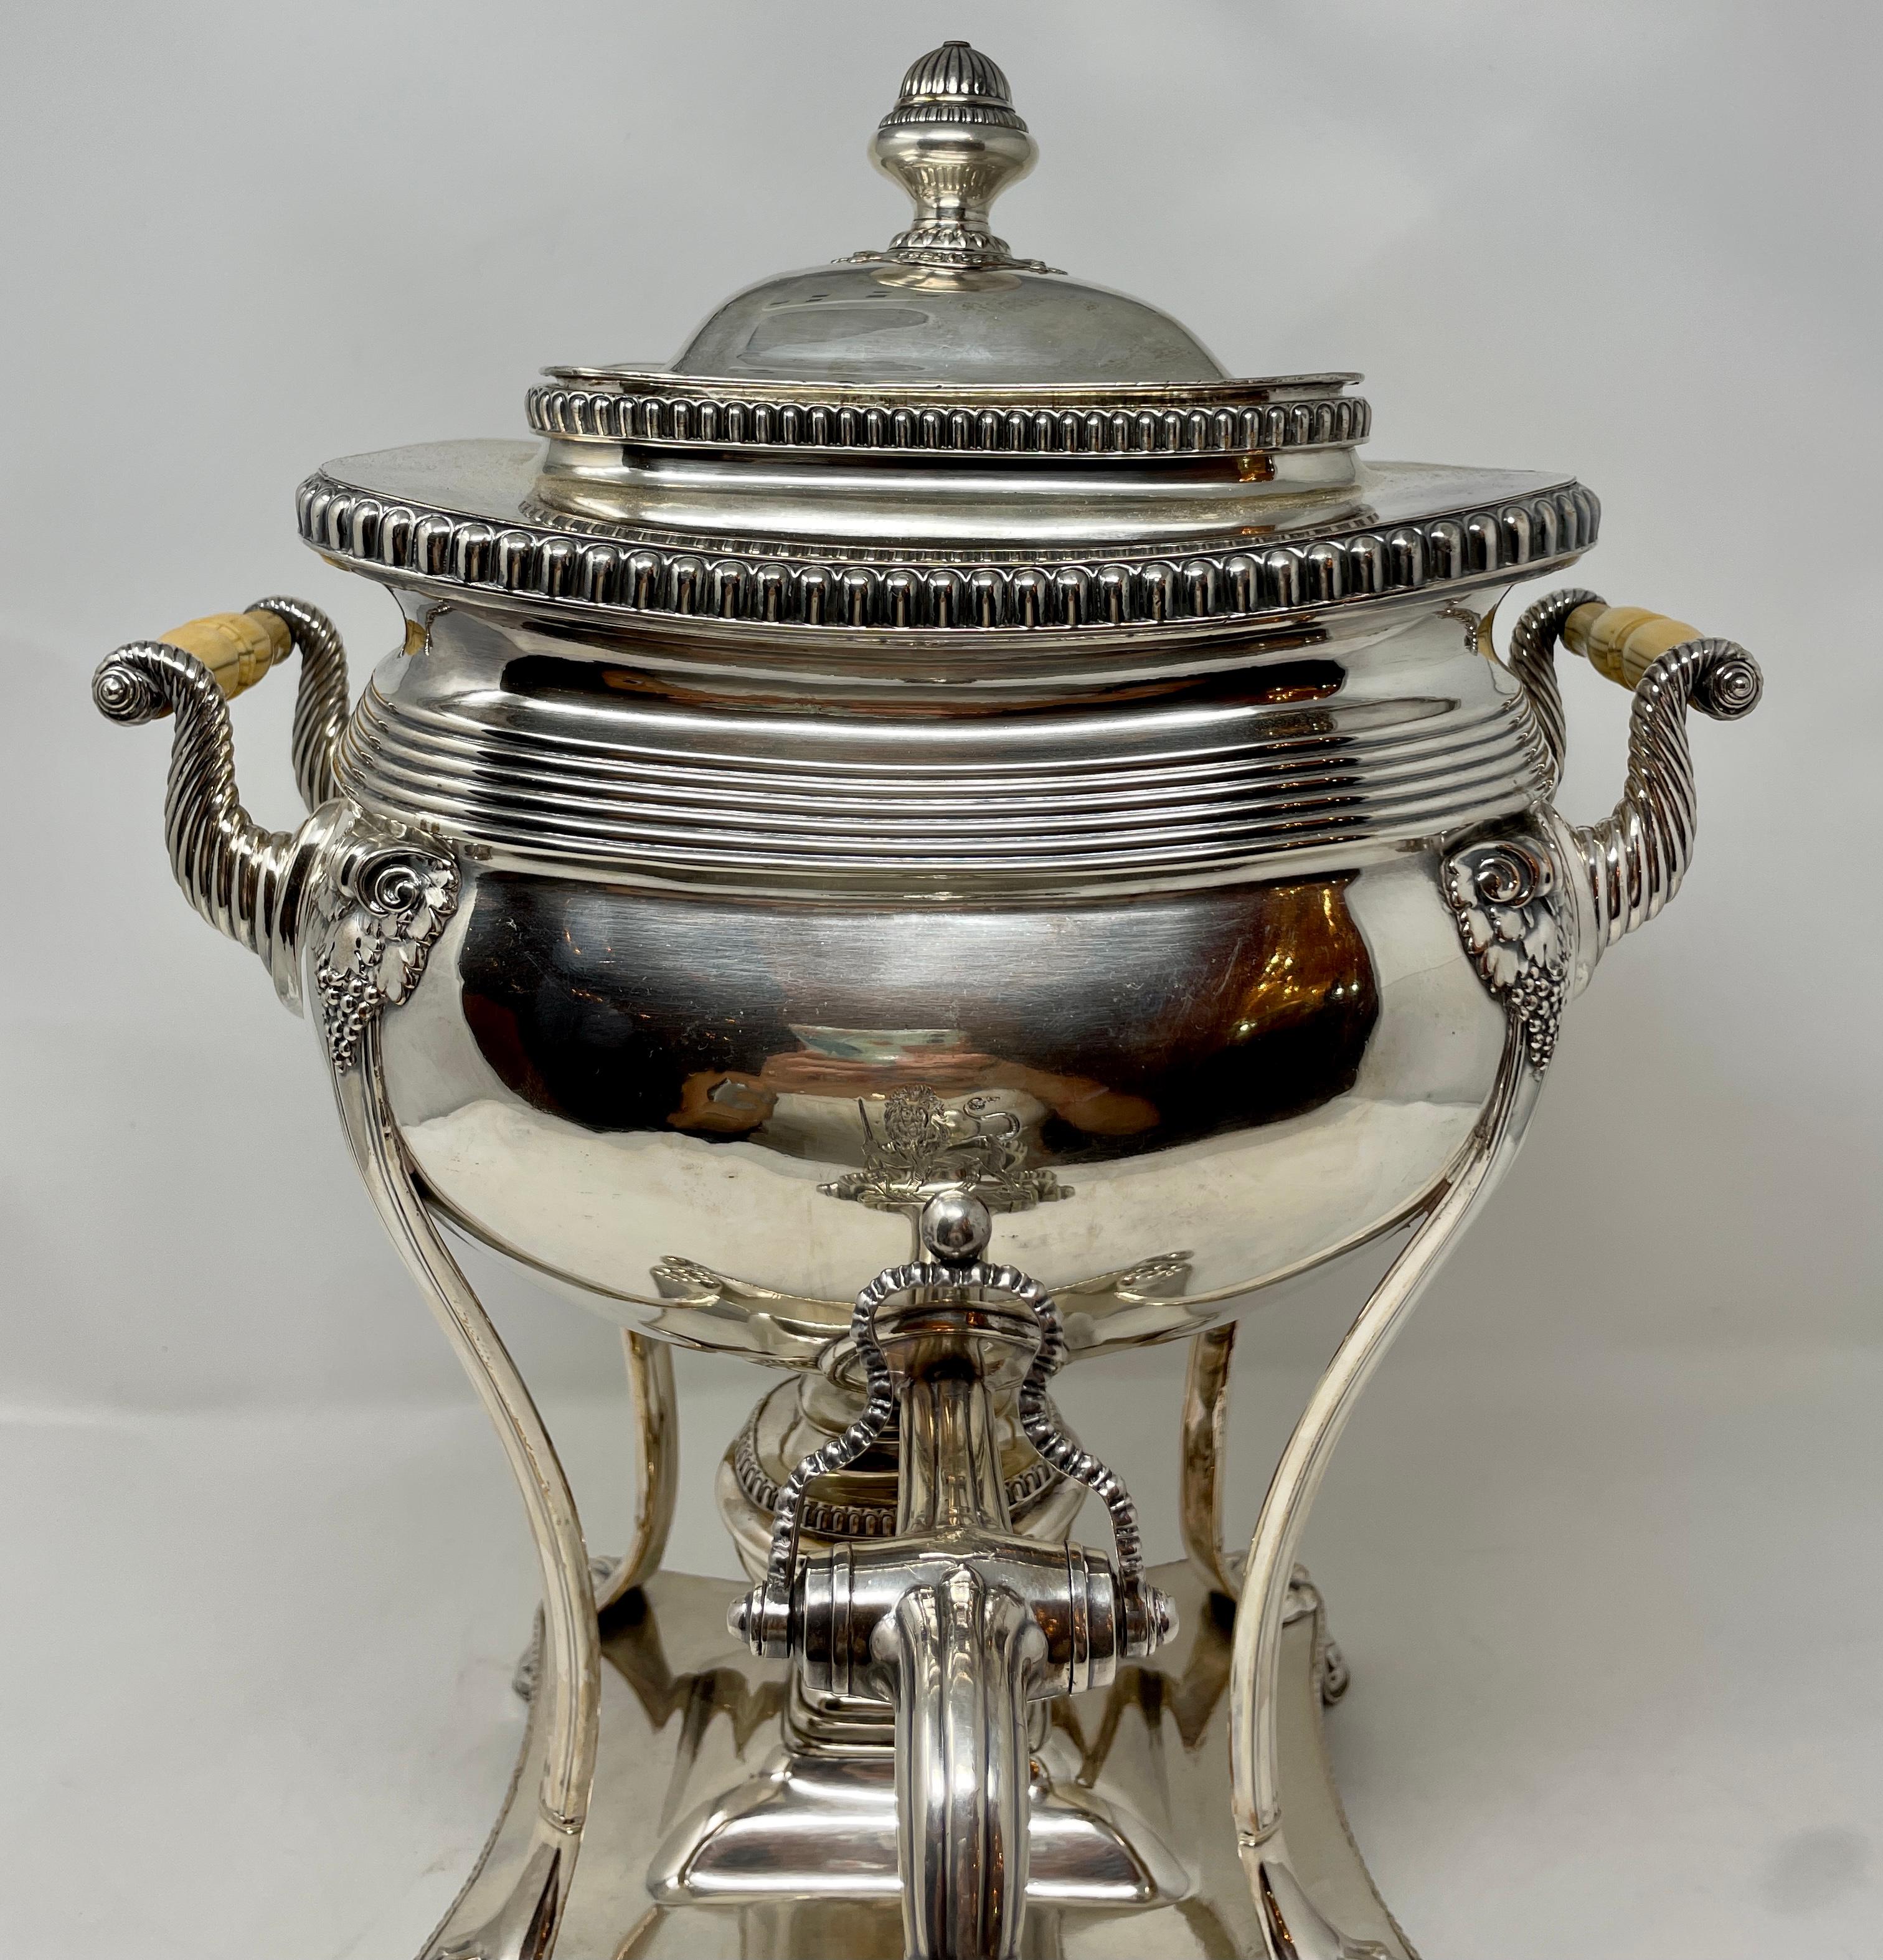 Sheffield Plate Antique English Sheffield Silver-Plated Hot Water Kettle, circa 1880